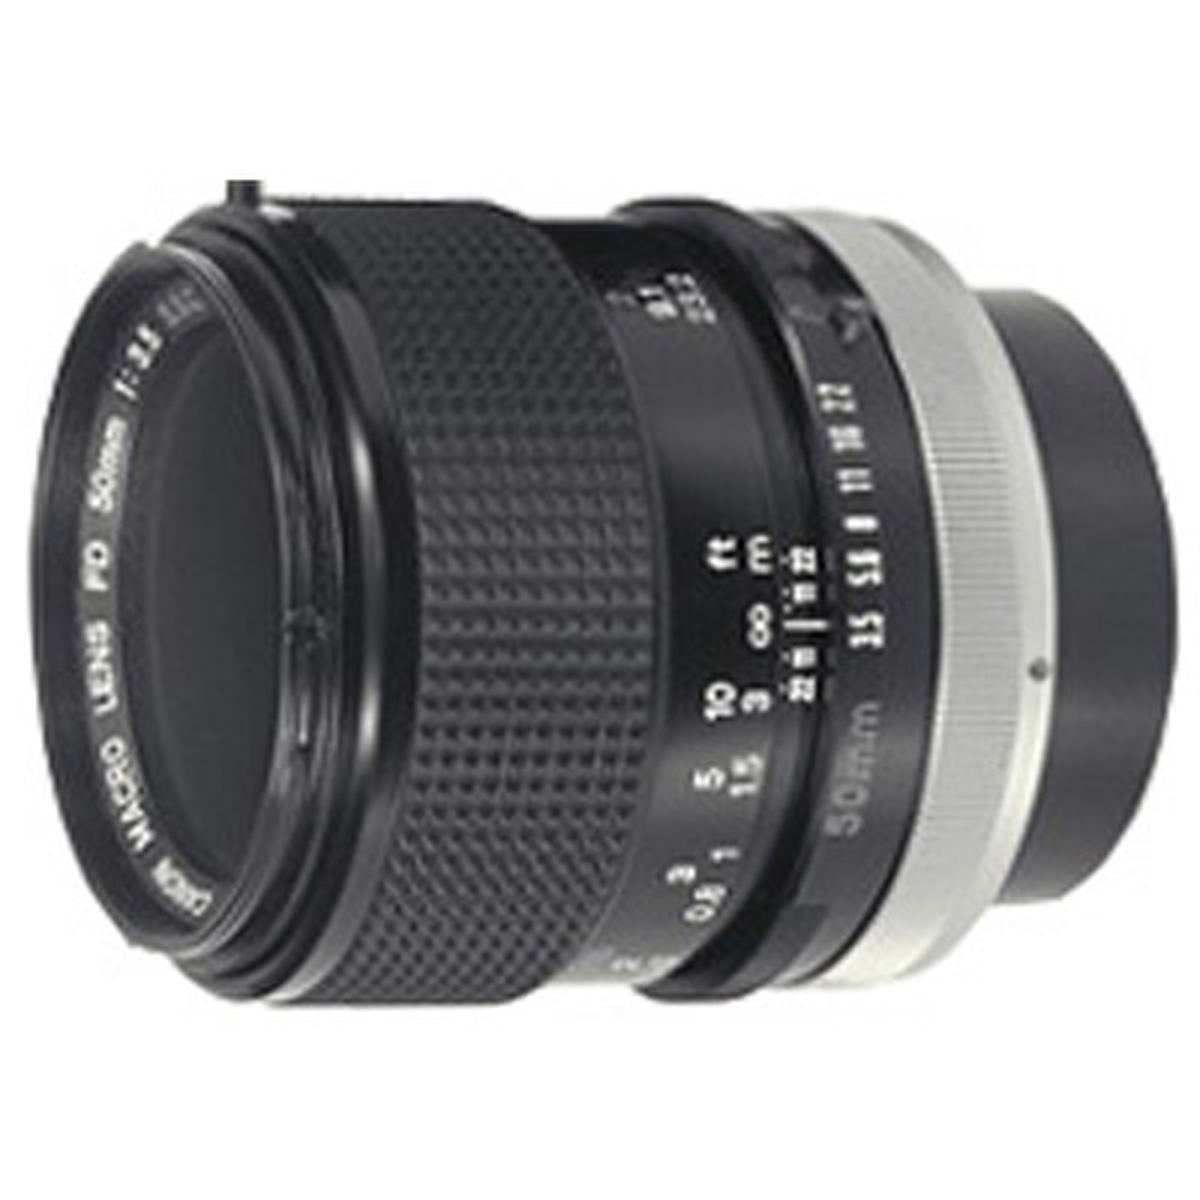 Canon FD Macro 50mm f/3.5 SSC : Specifications and Opinions